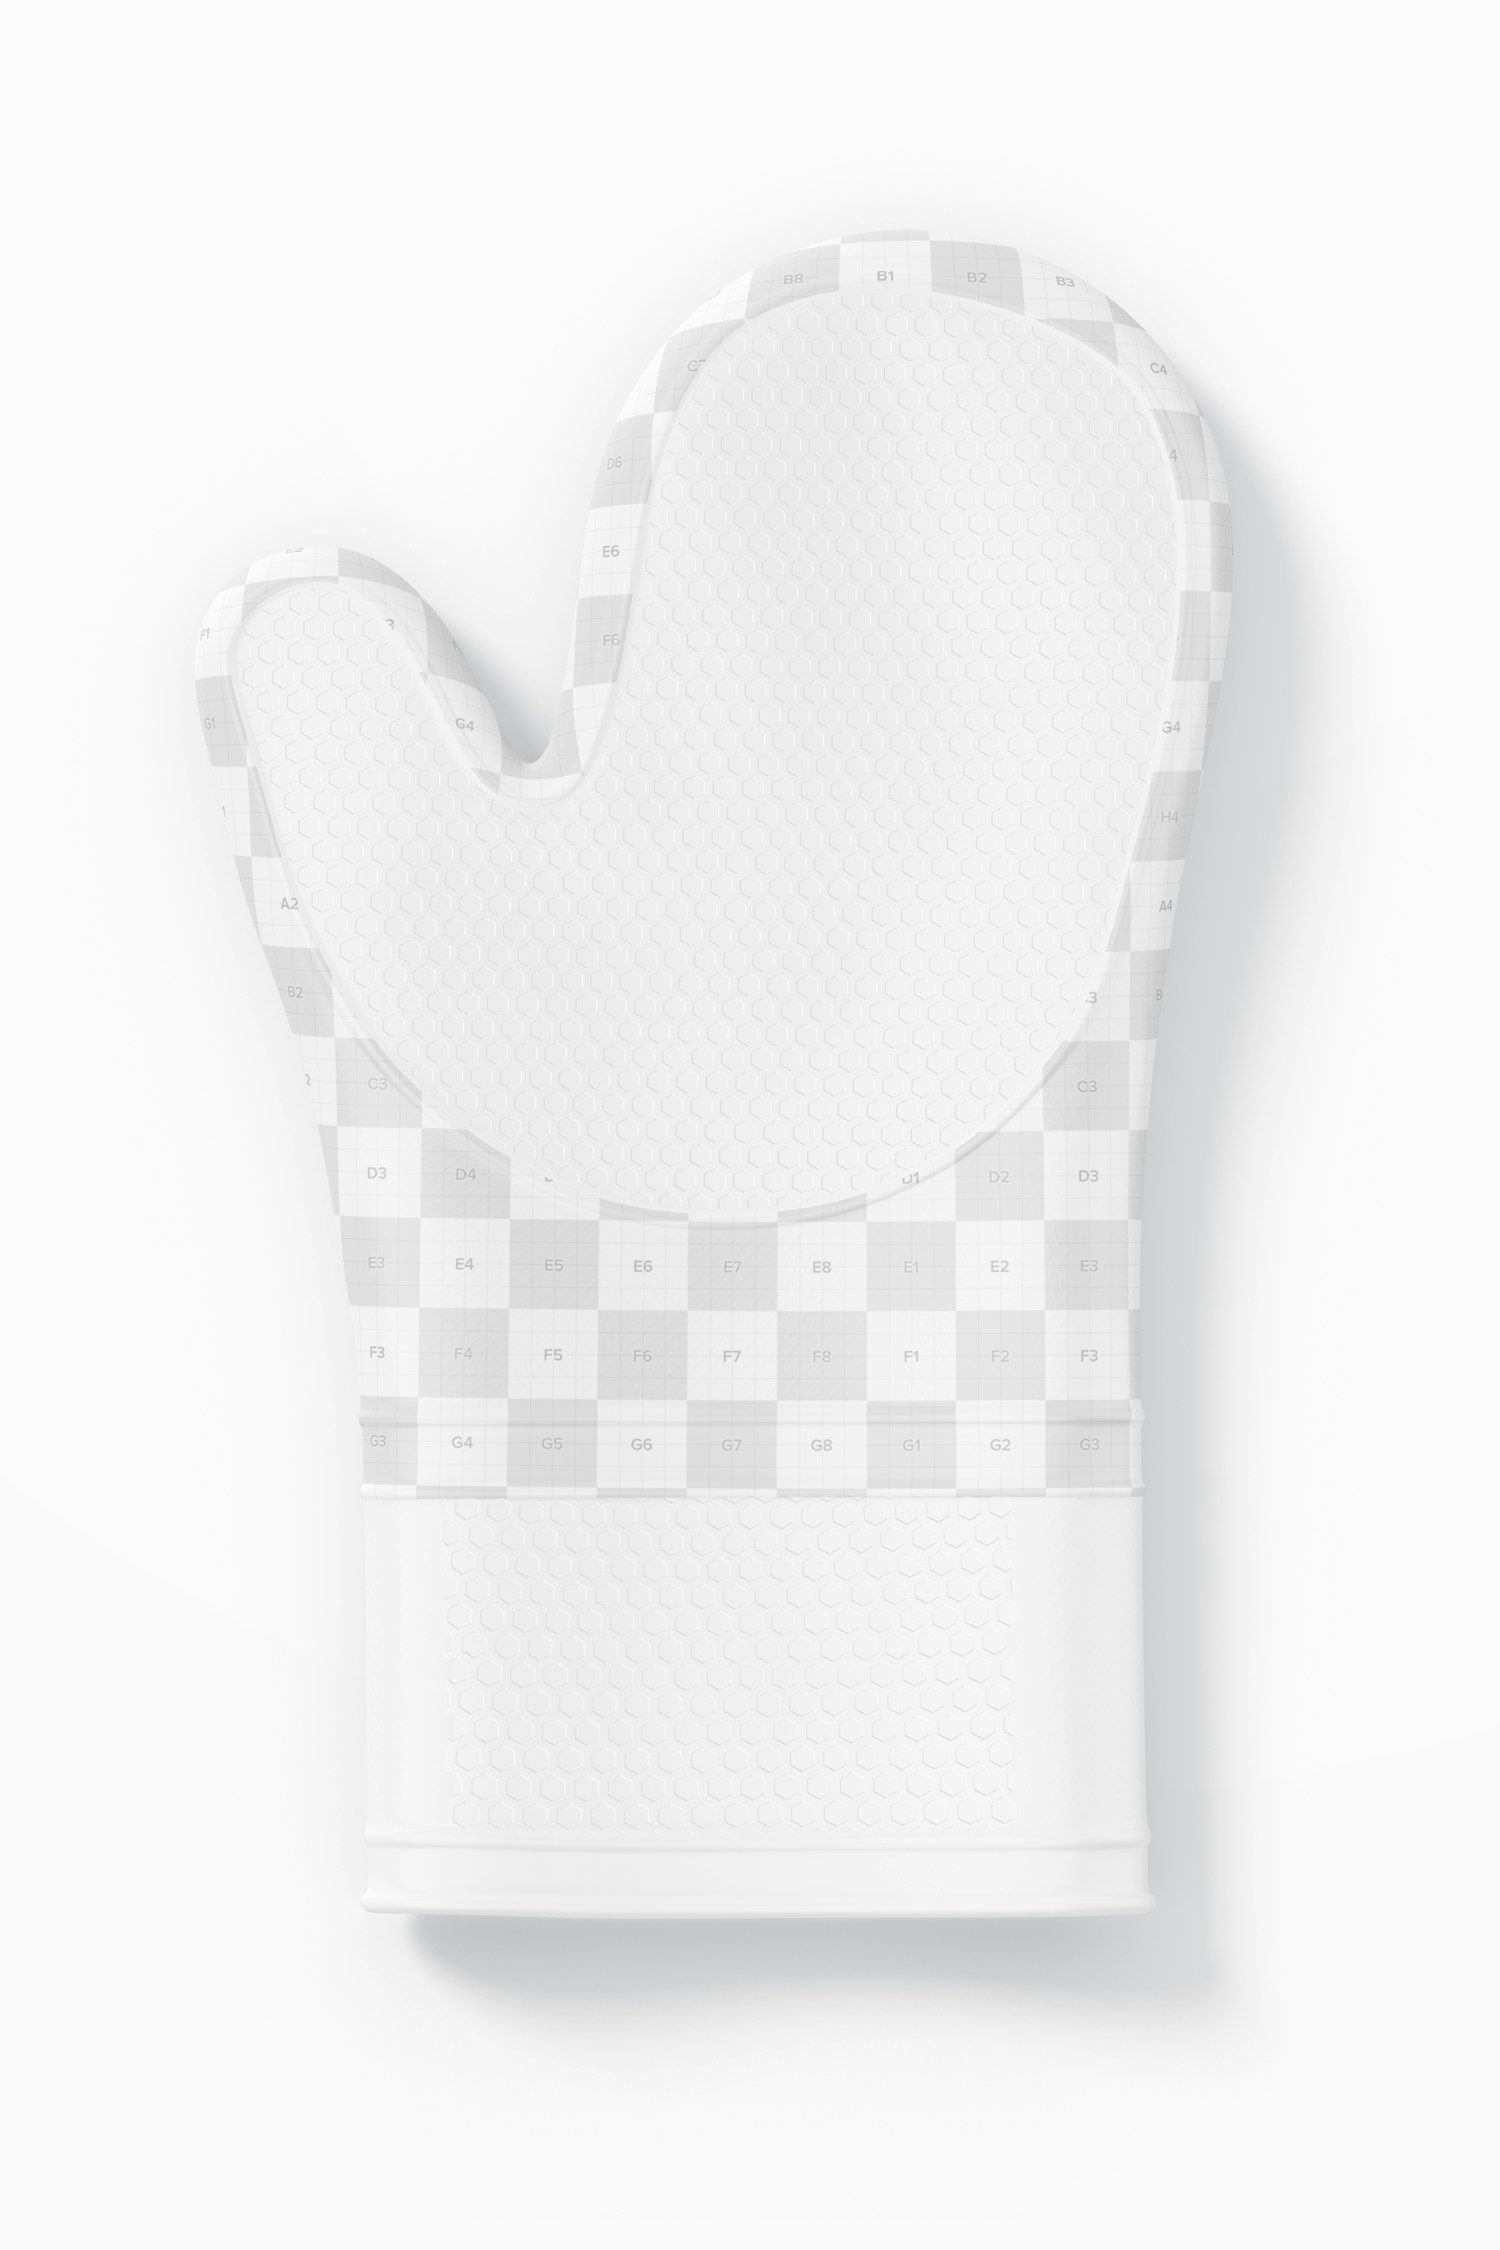 Large Silicone Oven Mitt Mockup, Top View